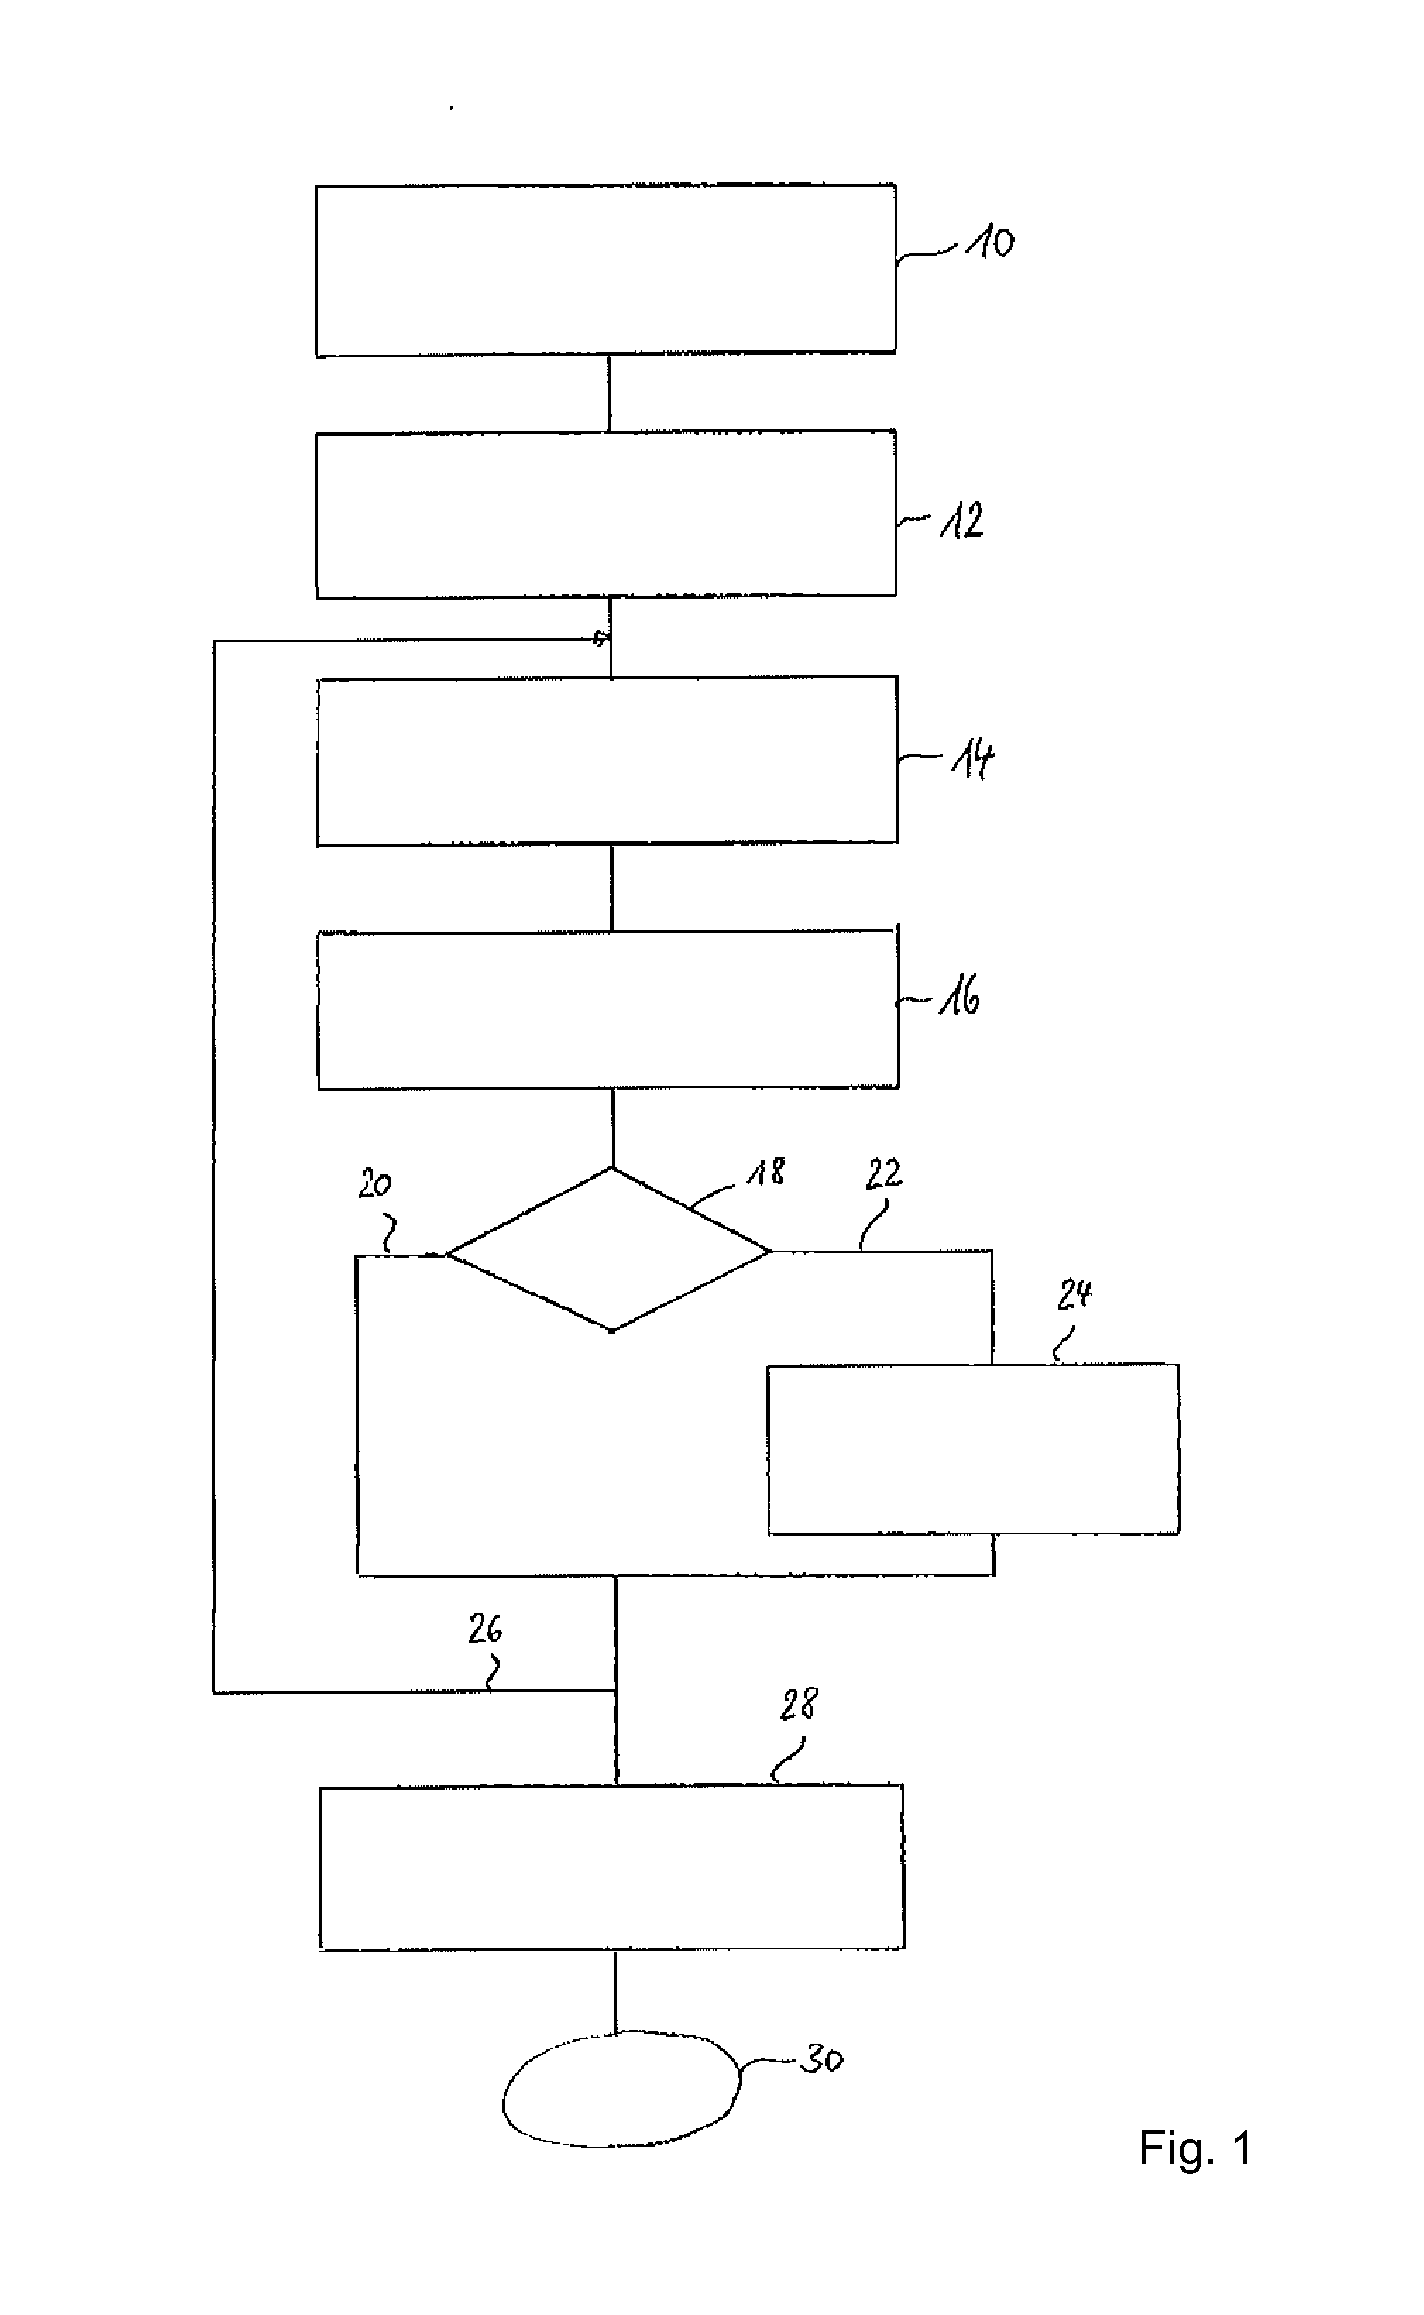 Method for supplying clear rinsing agents in a program-controlled dishwasher